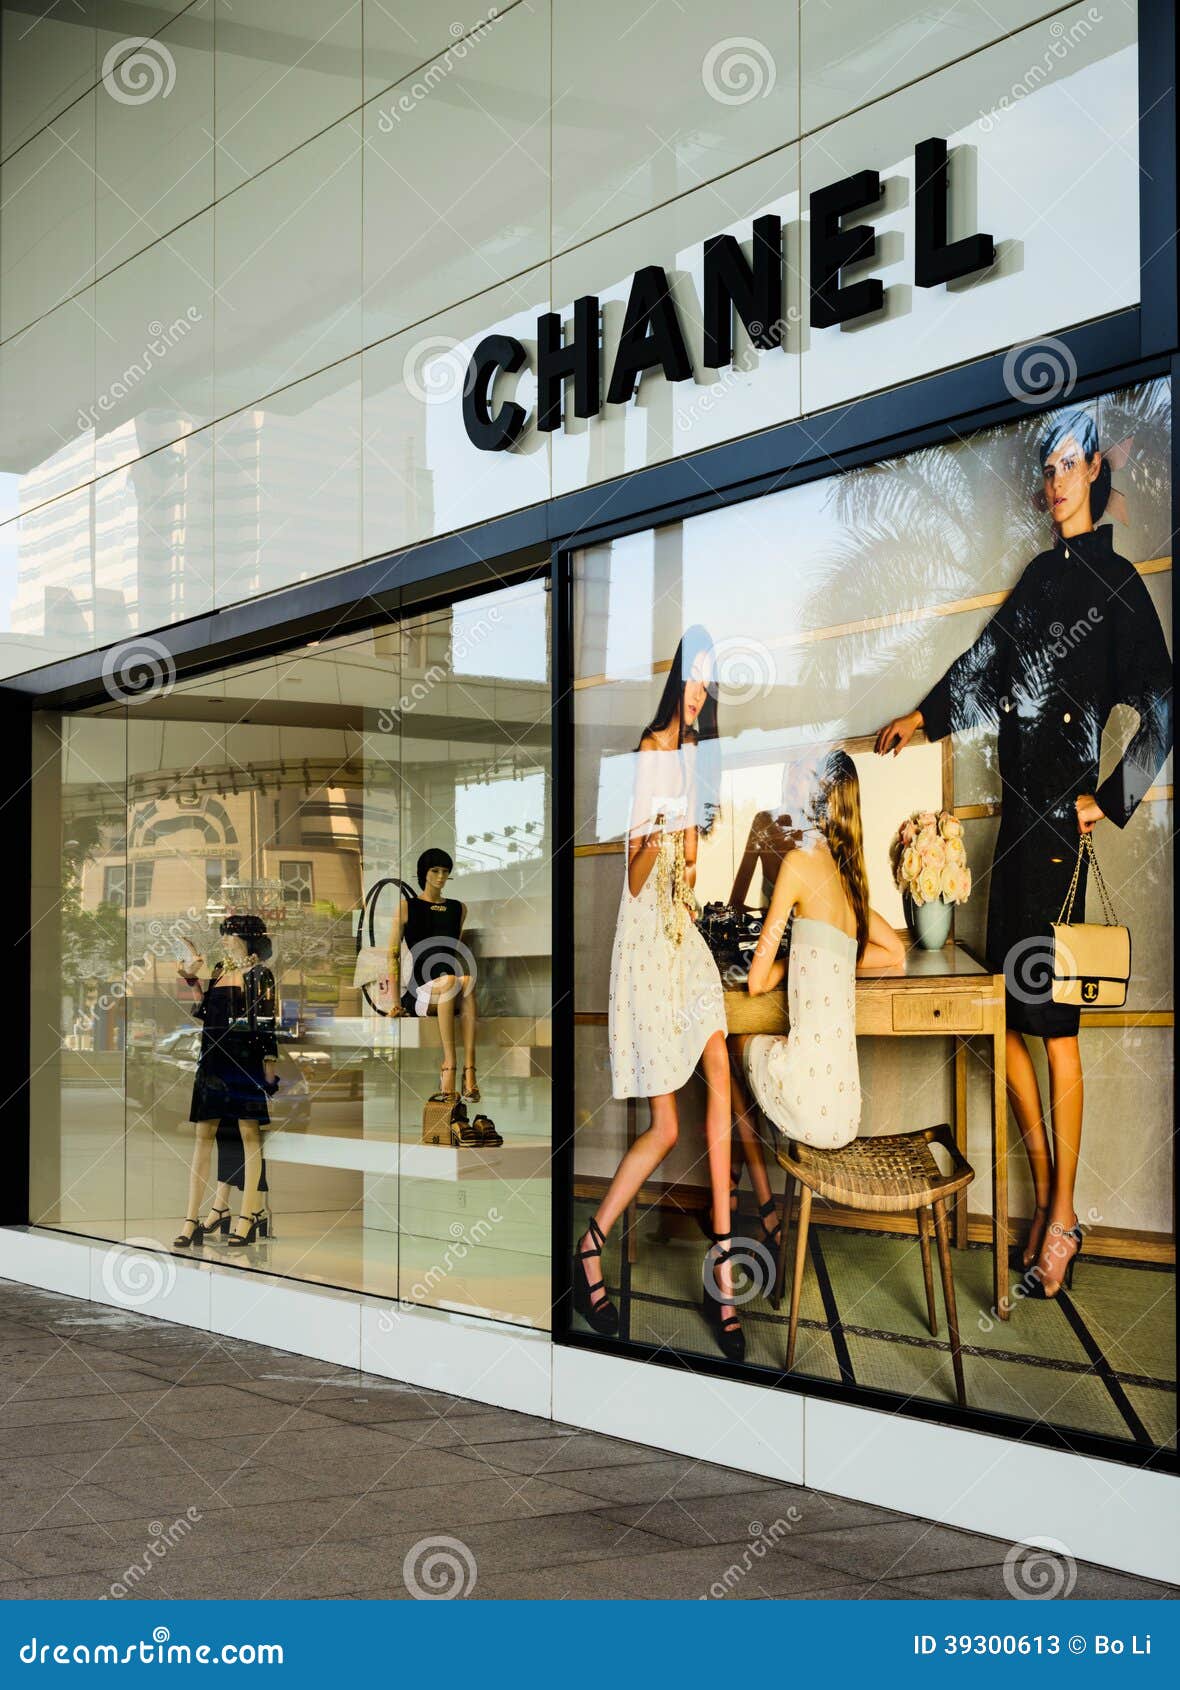 3+ Thousand Chanel Store Royalty-Free Images, Stock Photos